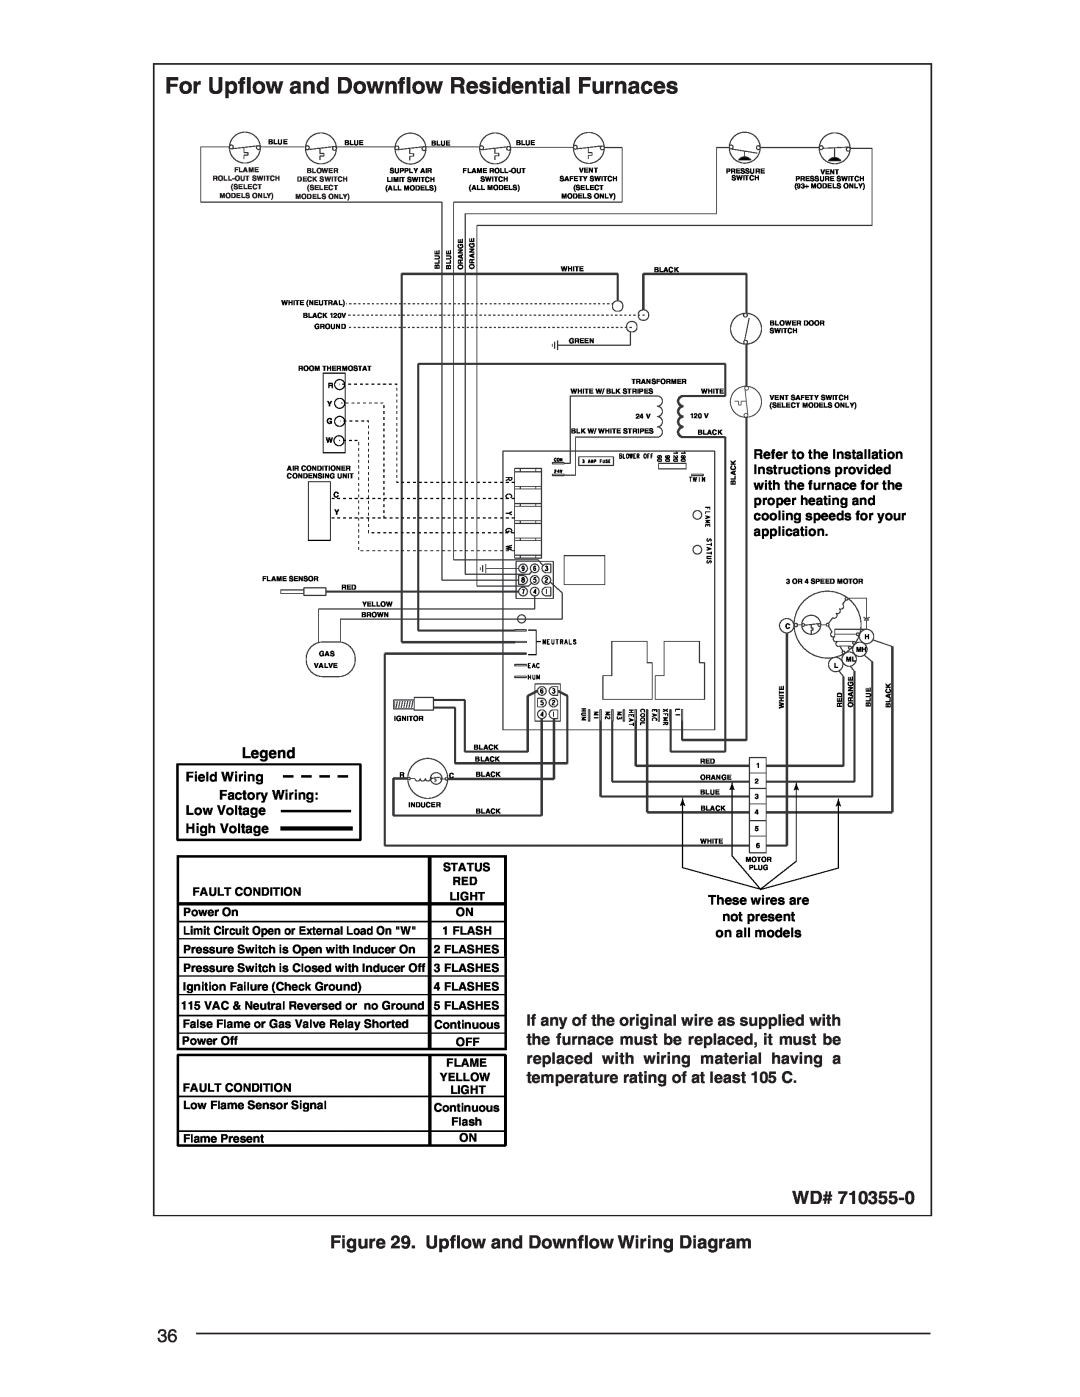 Nordyne RL 90+, RC 92+ For Upﬂow and Downﬂow Residential Furnaces, WD# . Upﬂow and Downﬂow Wiring Diagram 